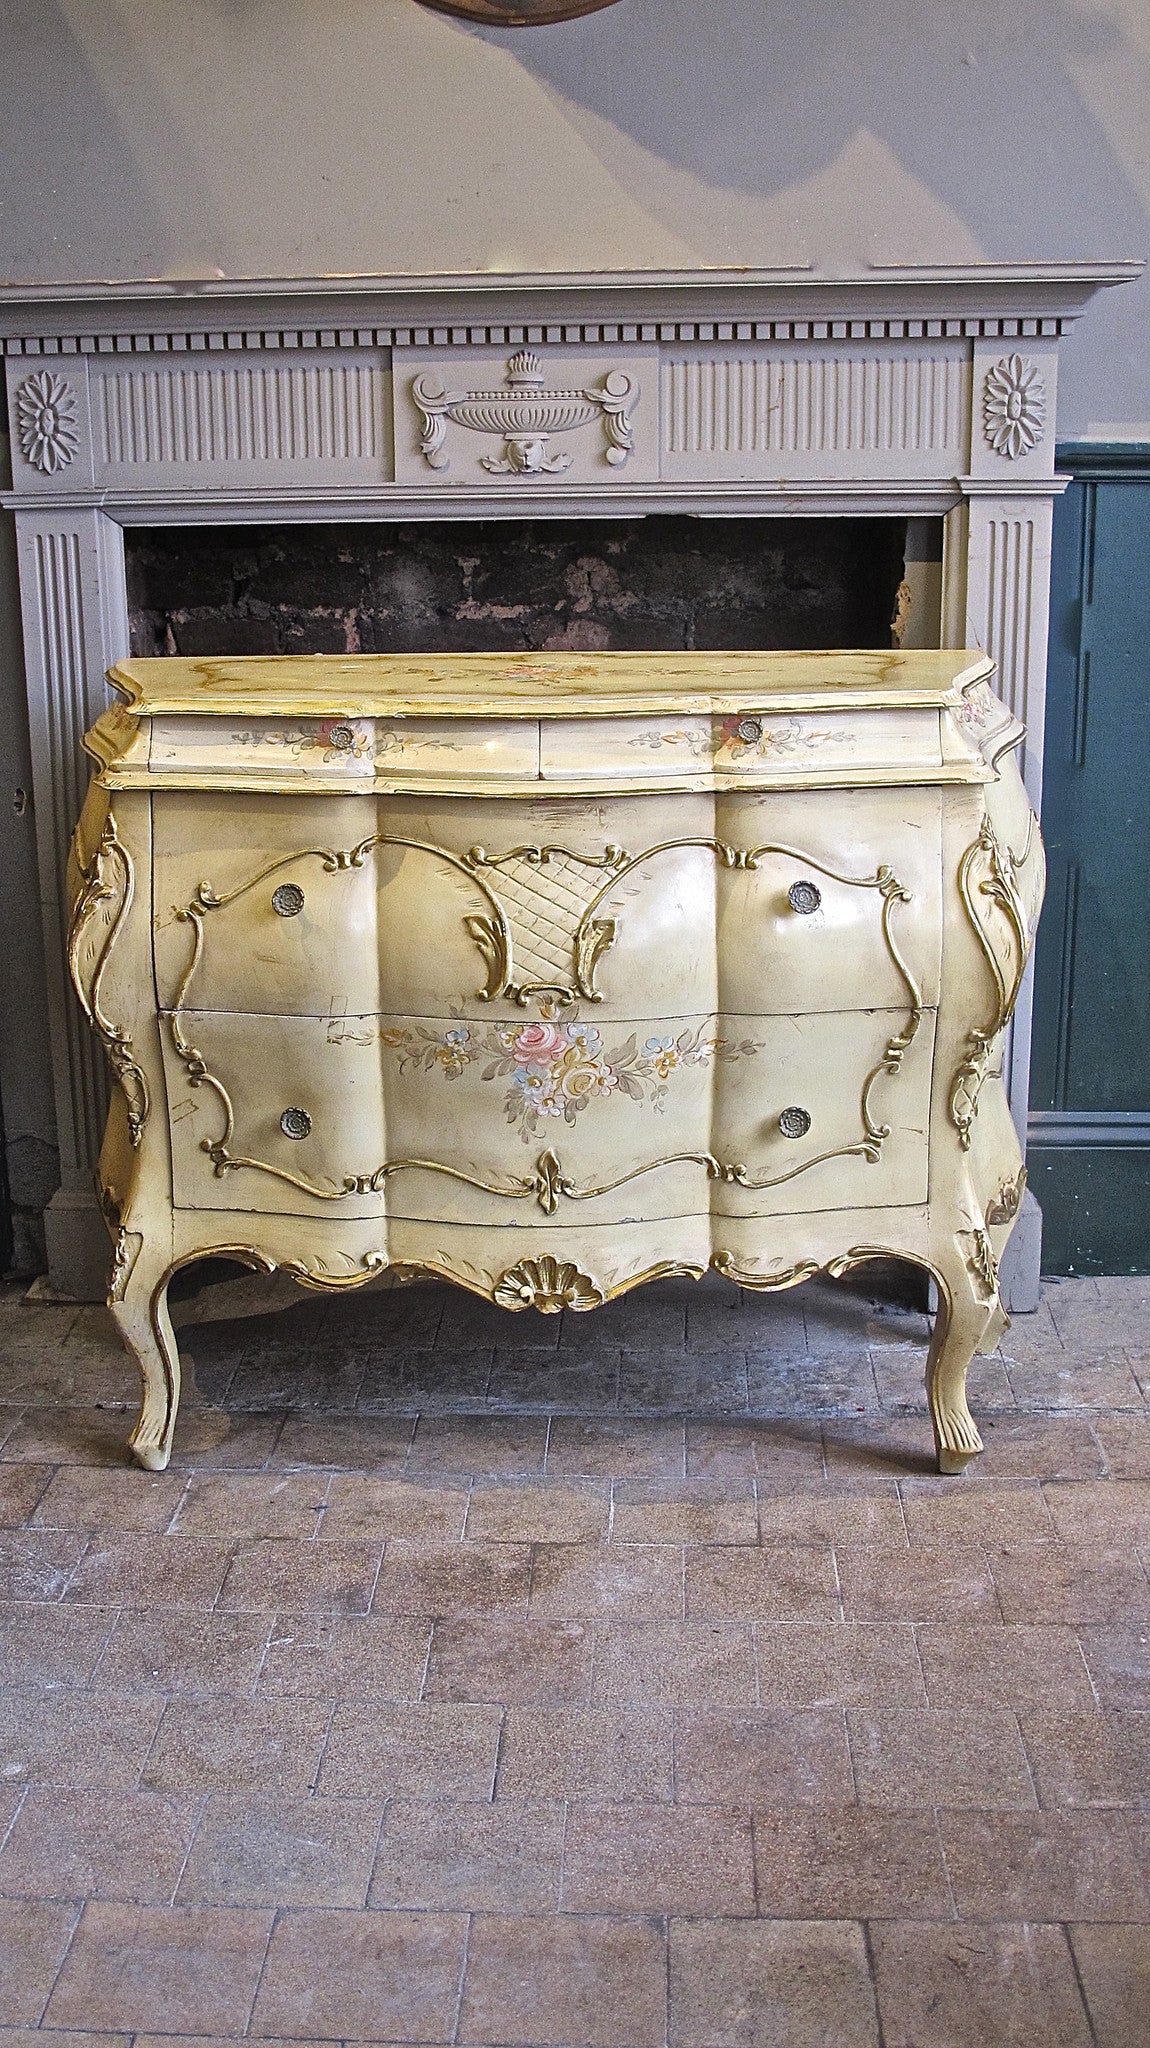 Bombe fronted italian commode circa 1950 with hand painted decoration.